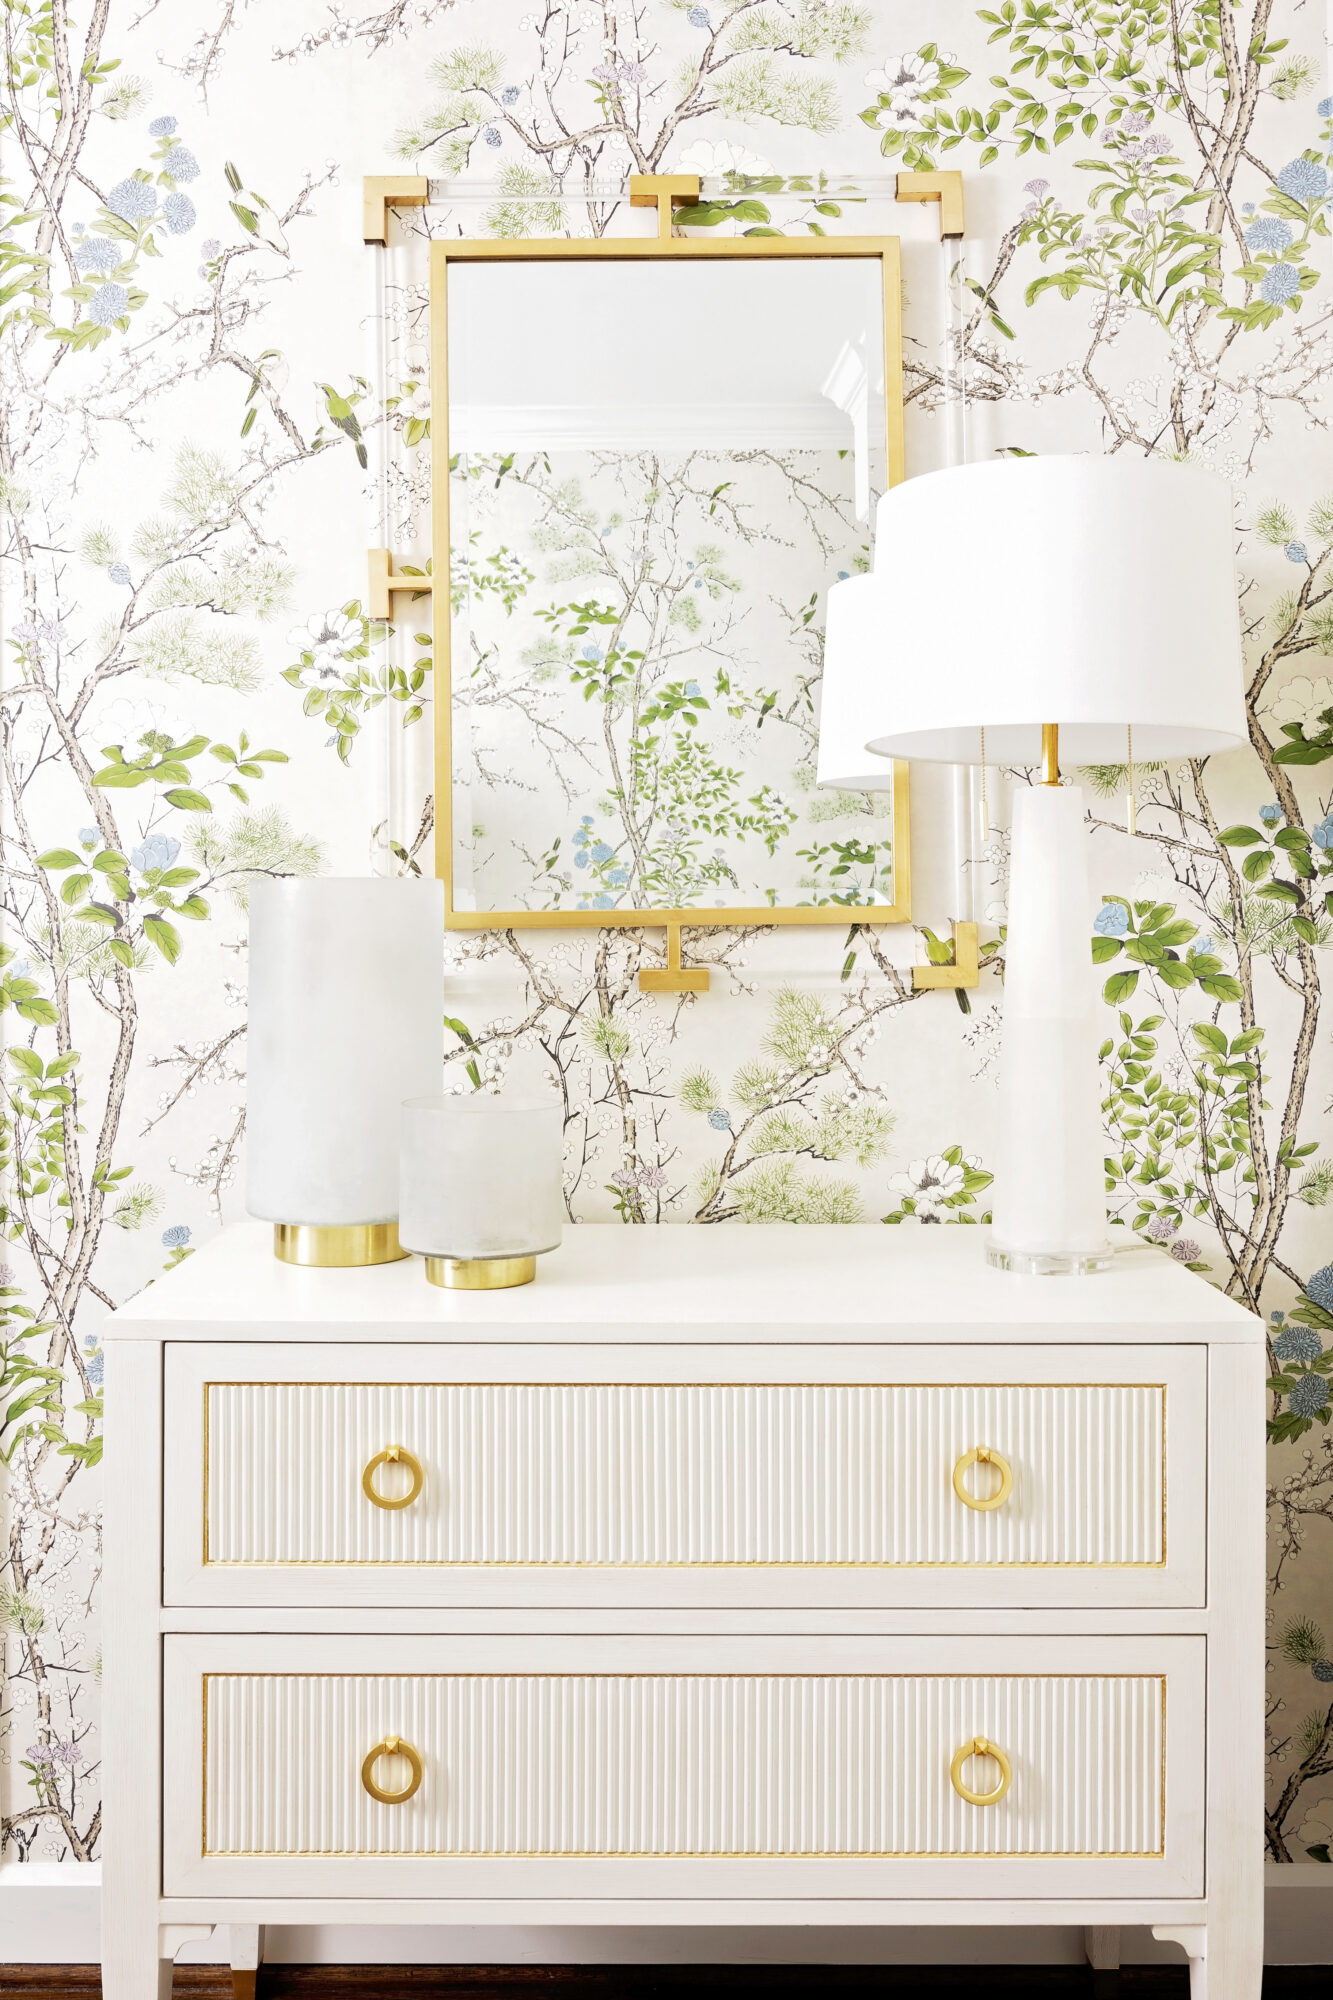 Elegant white dresser with gold accents and mirror, complemented by a botanical motif in a transitional palette of creamy whites and metallic gold.